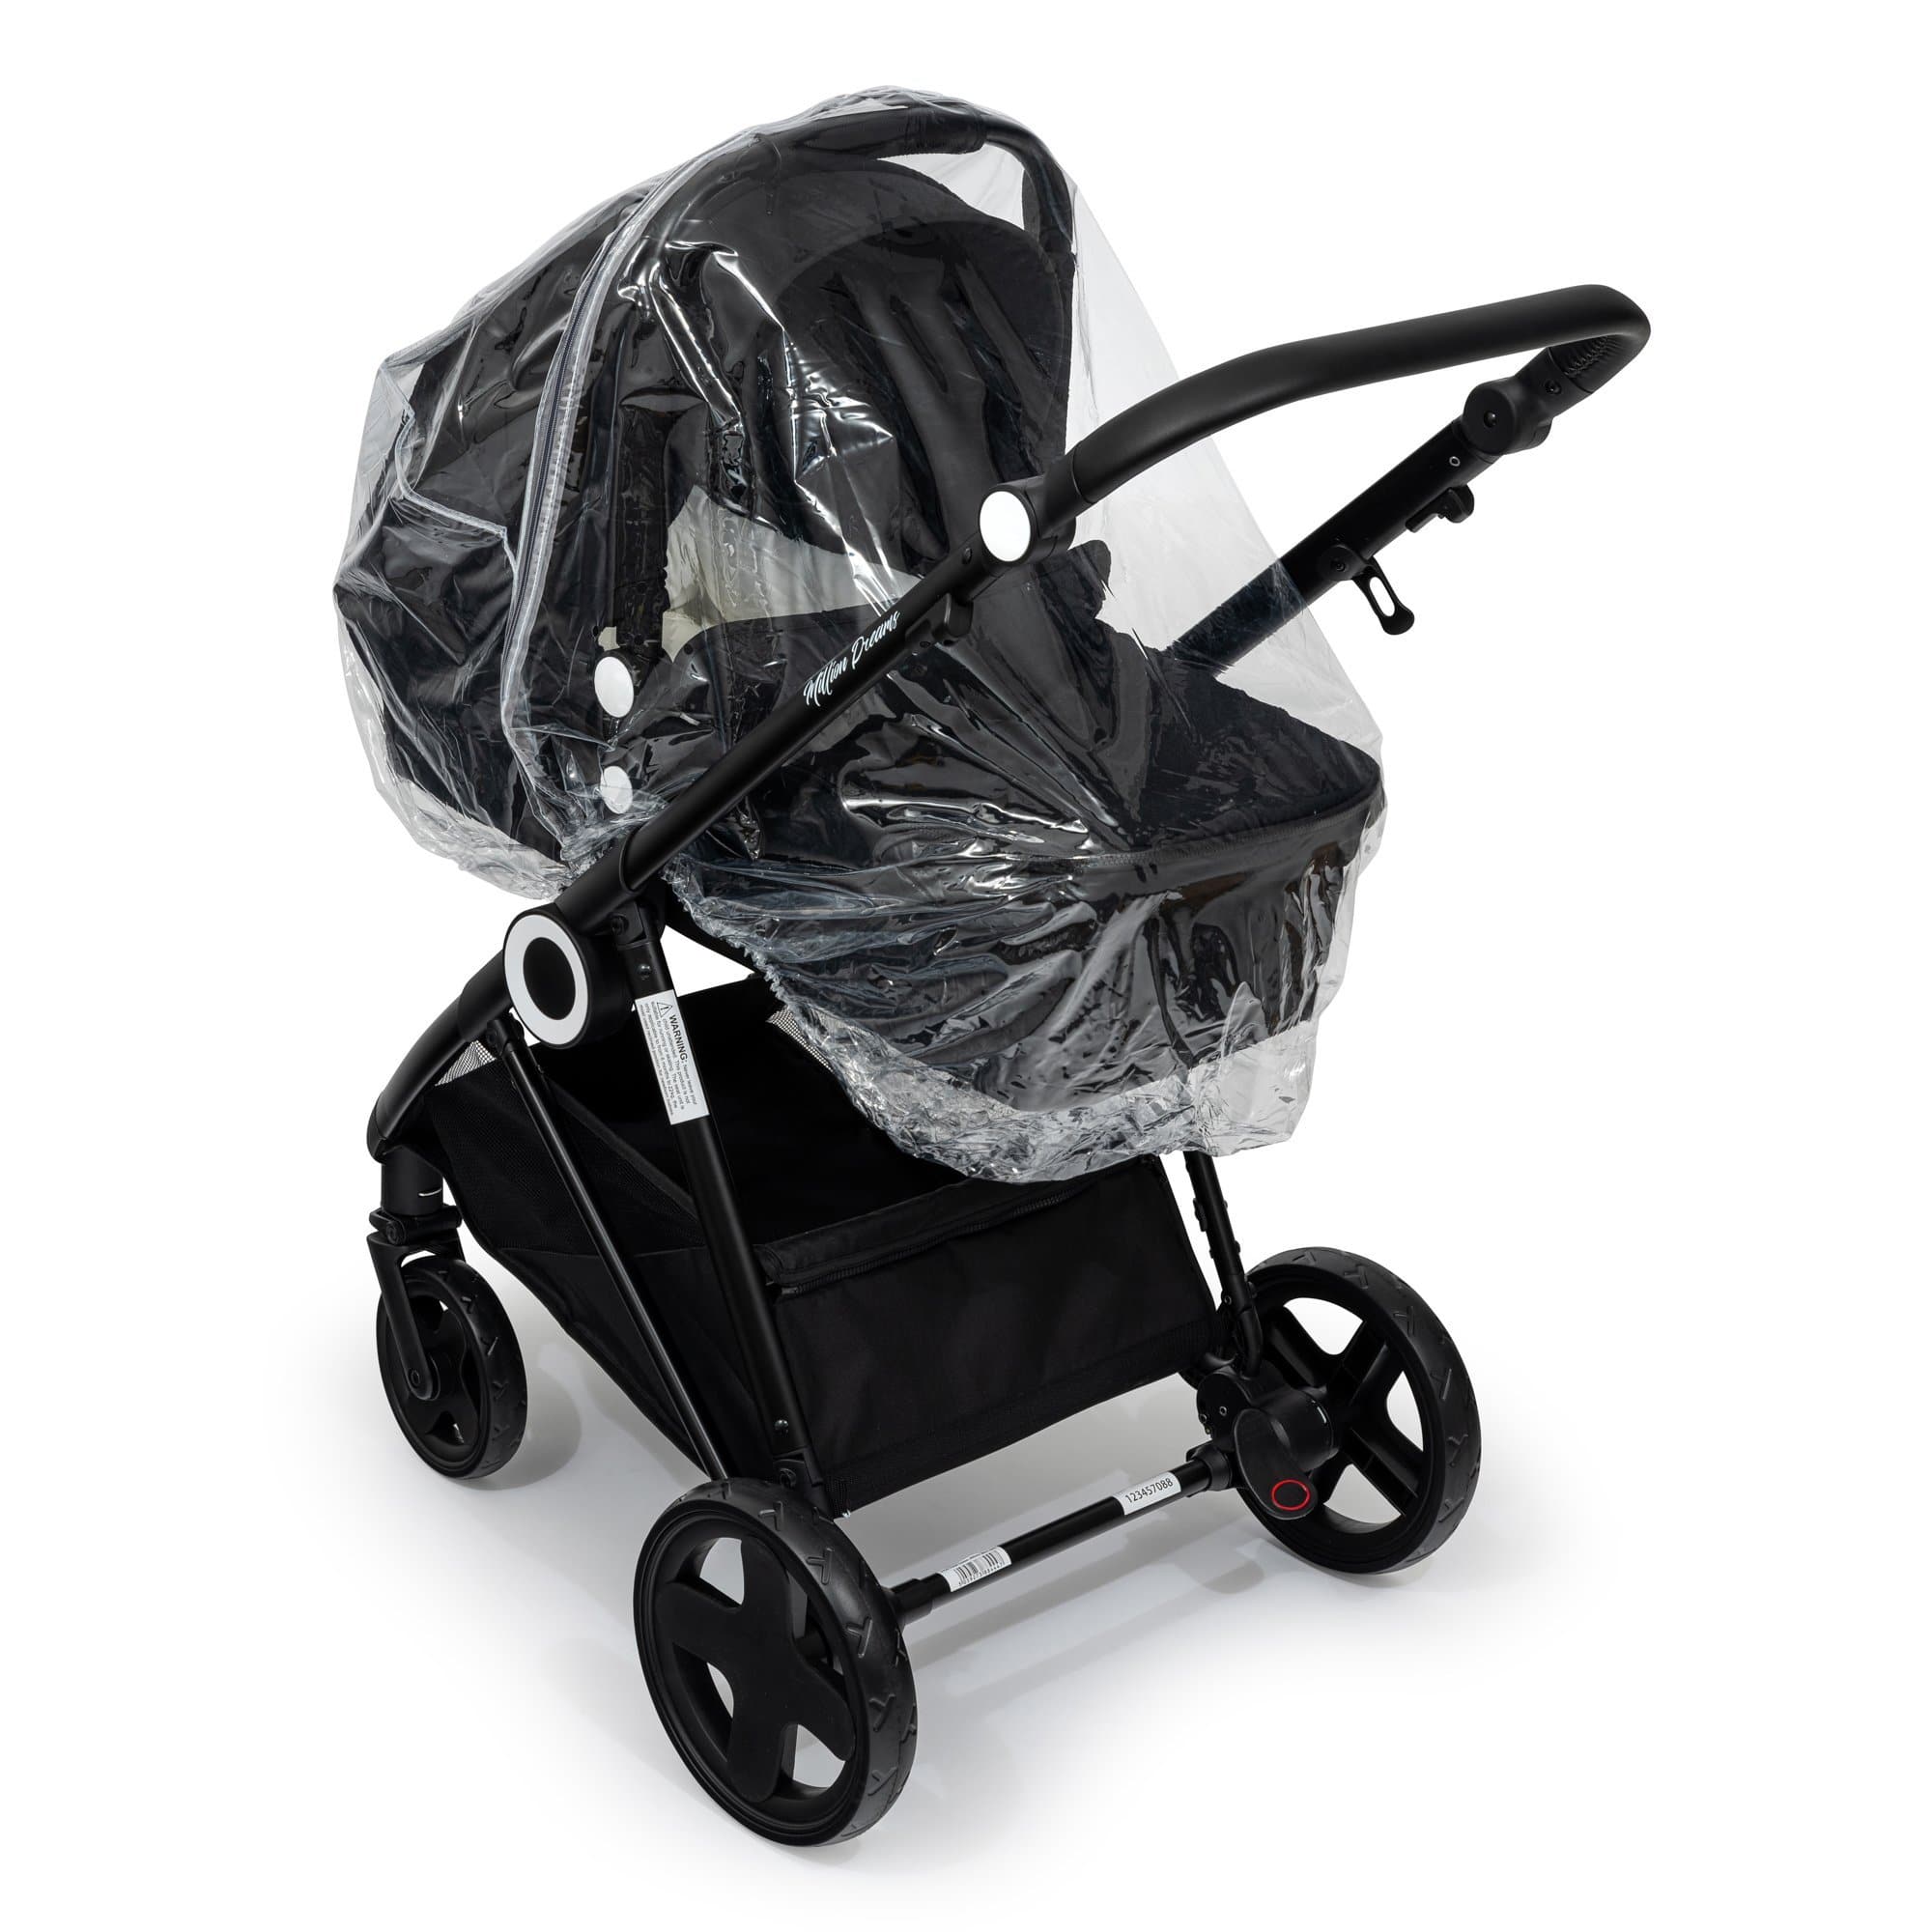 2 in 1 Rain Cover Compatible with Maxi Cosi - Fits All Models - For Your Little One